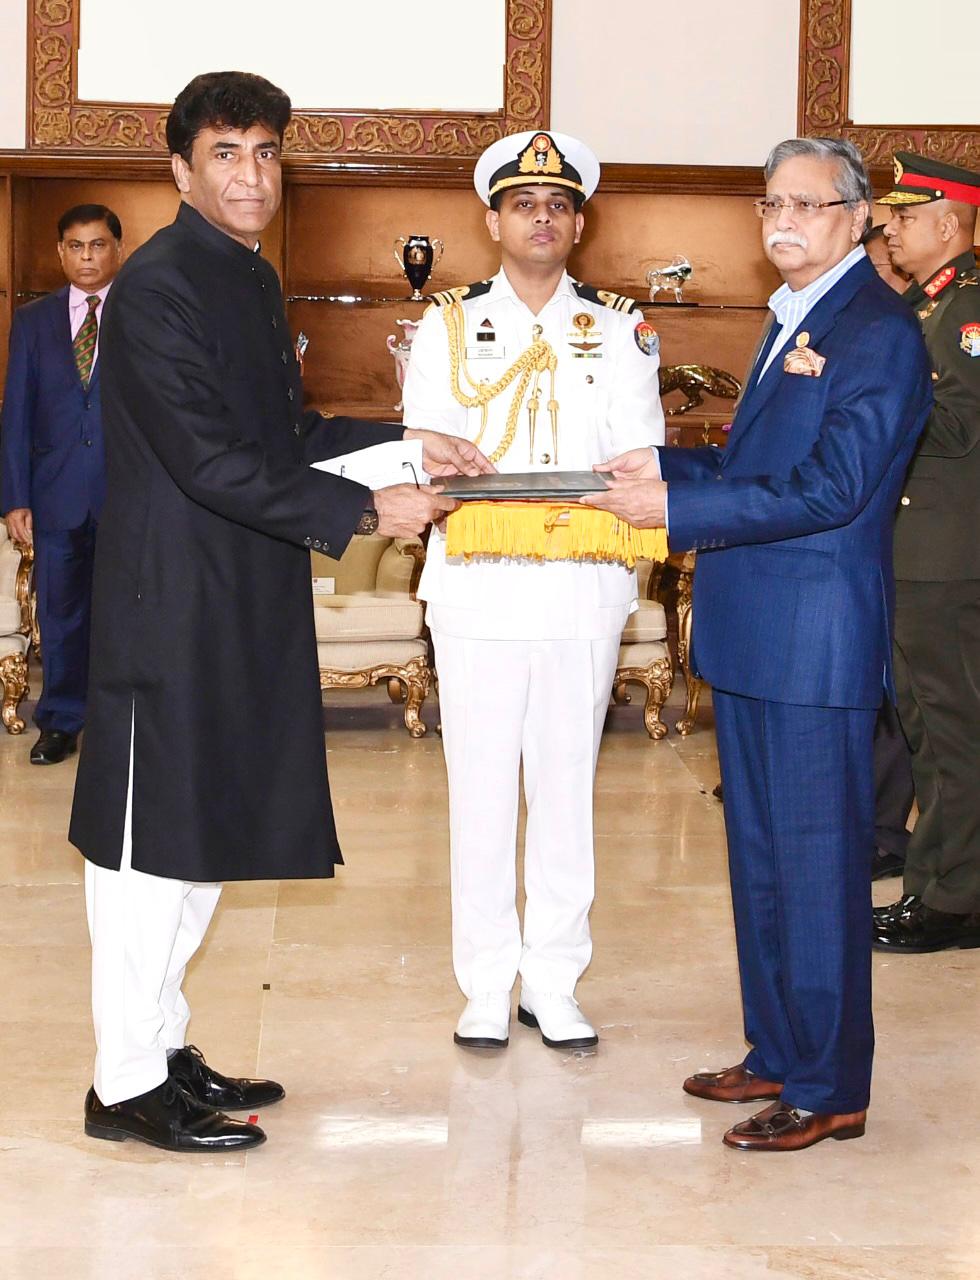 Pakistan’s HC presents credentials to the President of Bangladesh